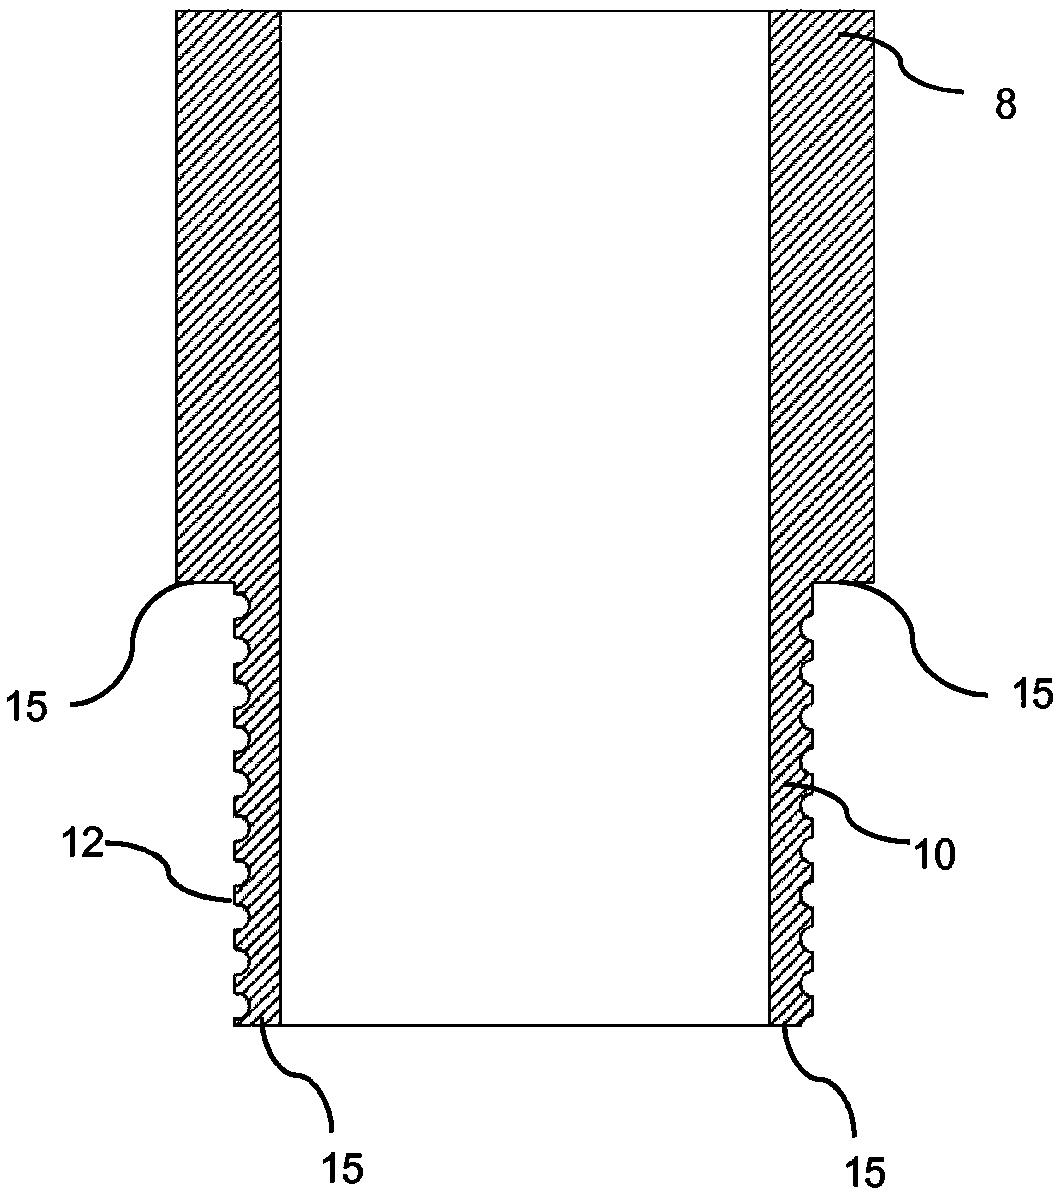 Filter element for filtering exhaust gases or process gases, and method for producing such a filter element